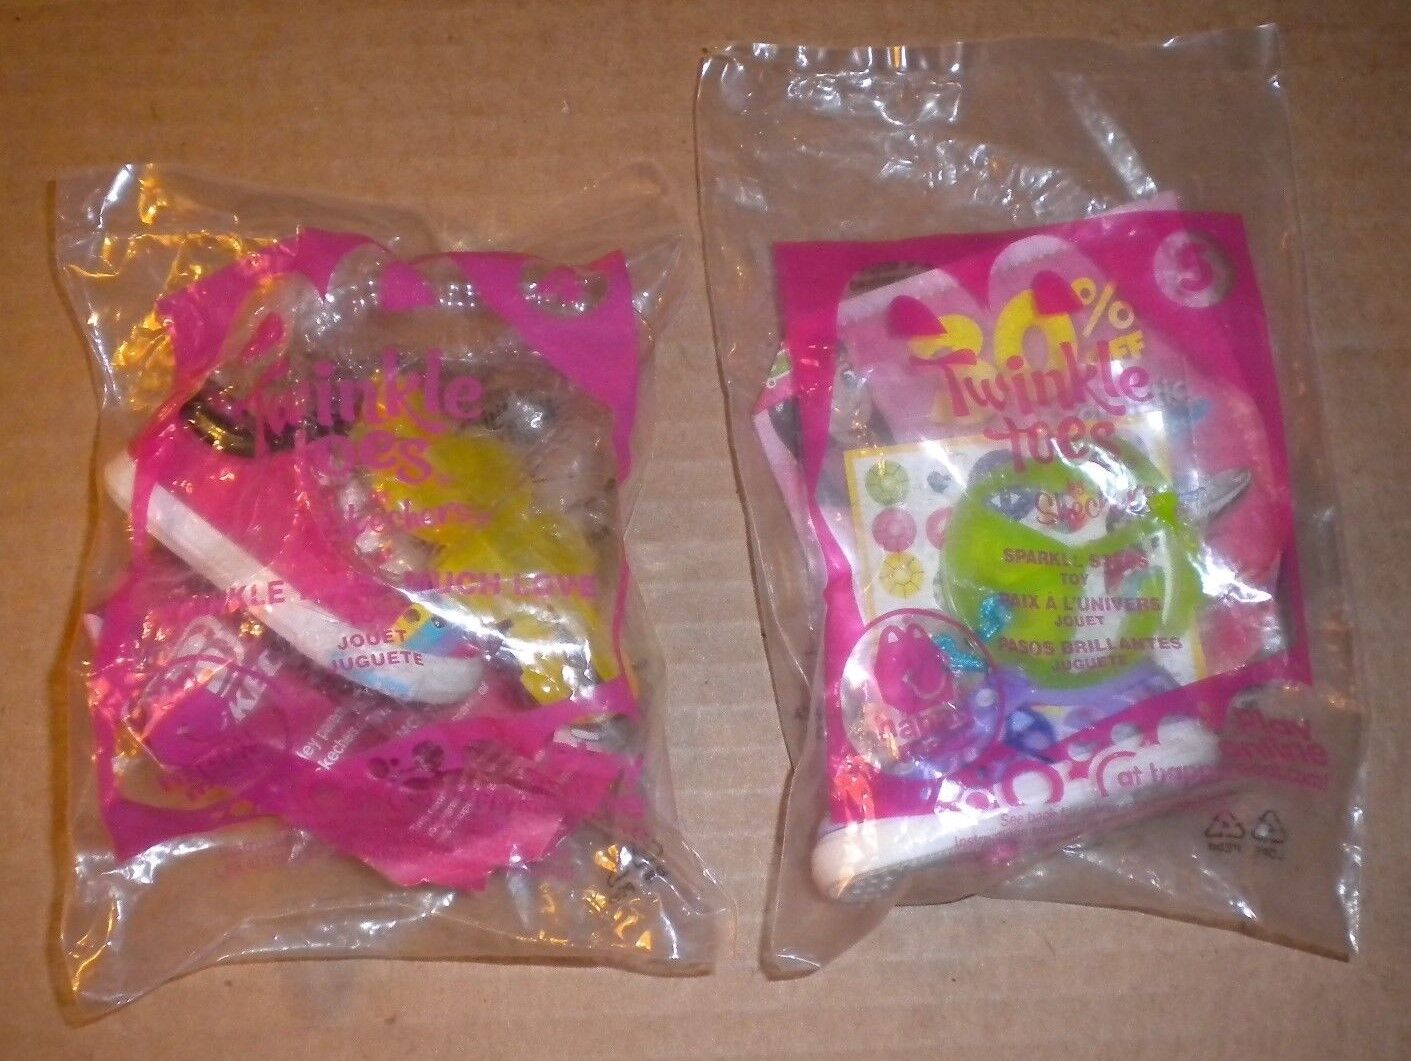 LOT 2 McDONALD MEAL TOYS TWINKLE TOES #4 MUCH LOVE& #5 SPARKLE STEPS SEALED BAGS